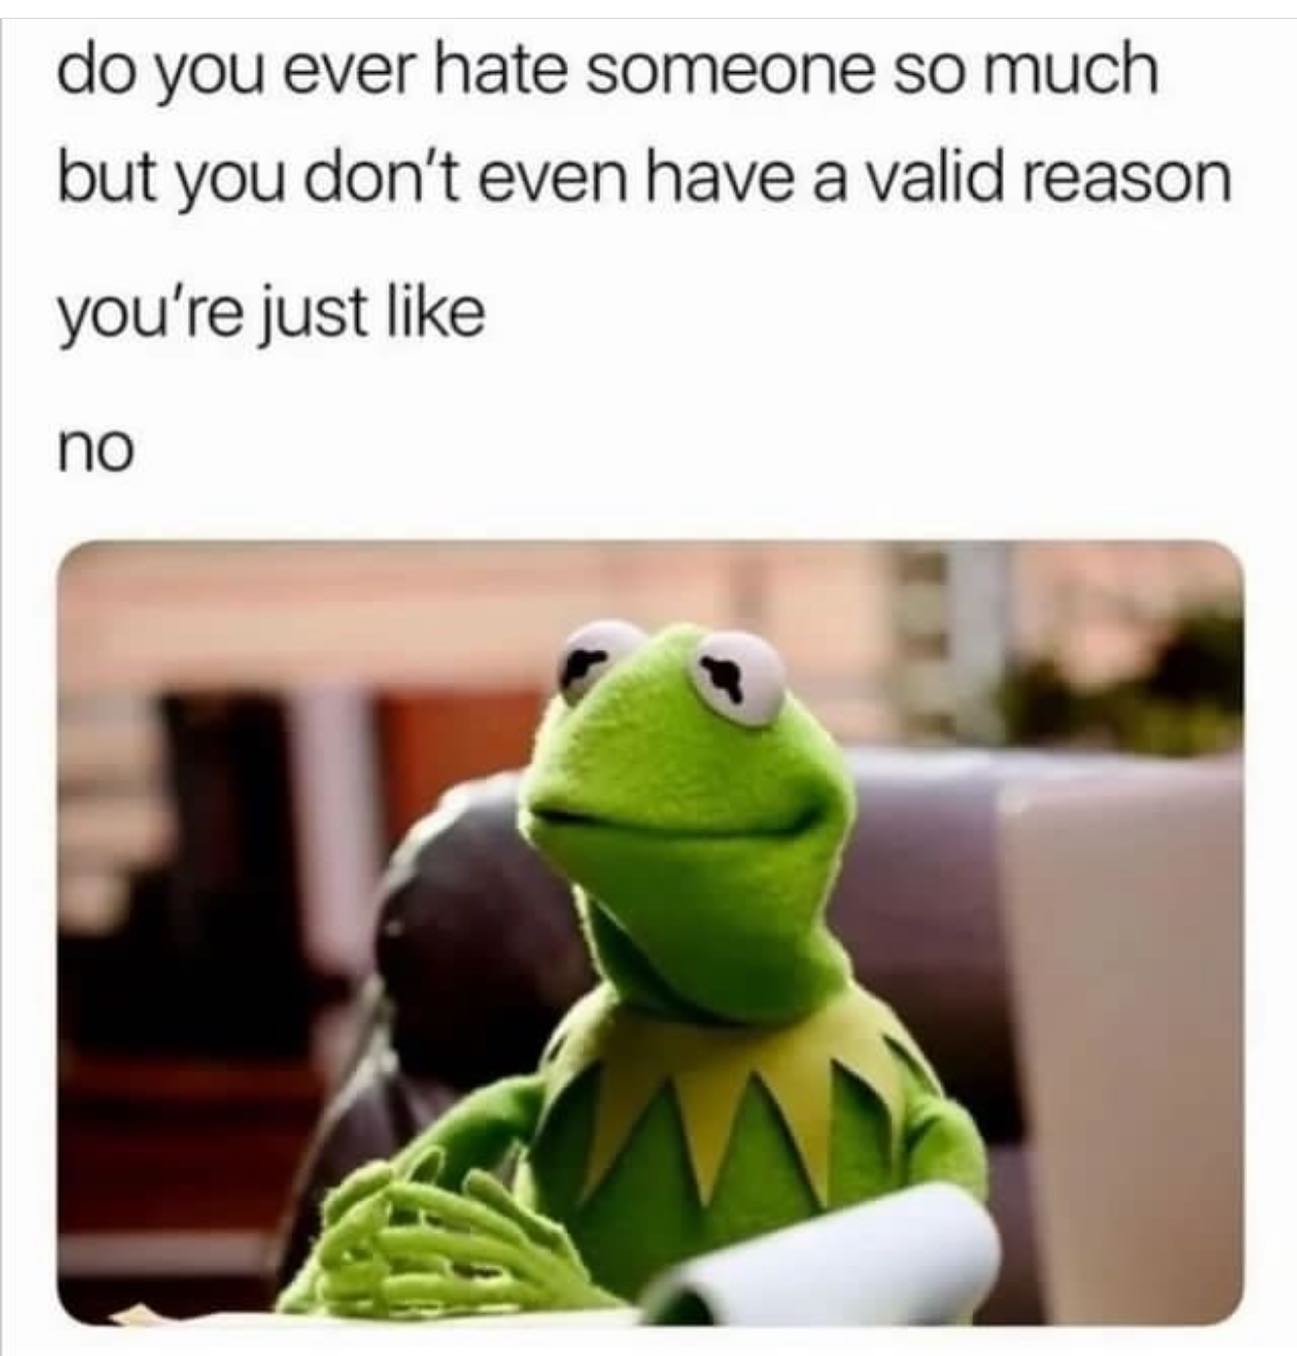 funny memes - dank memes - kermit the frog meme - do you ever hate someone so much but you don't even have a valid reason you're just no